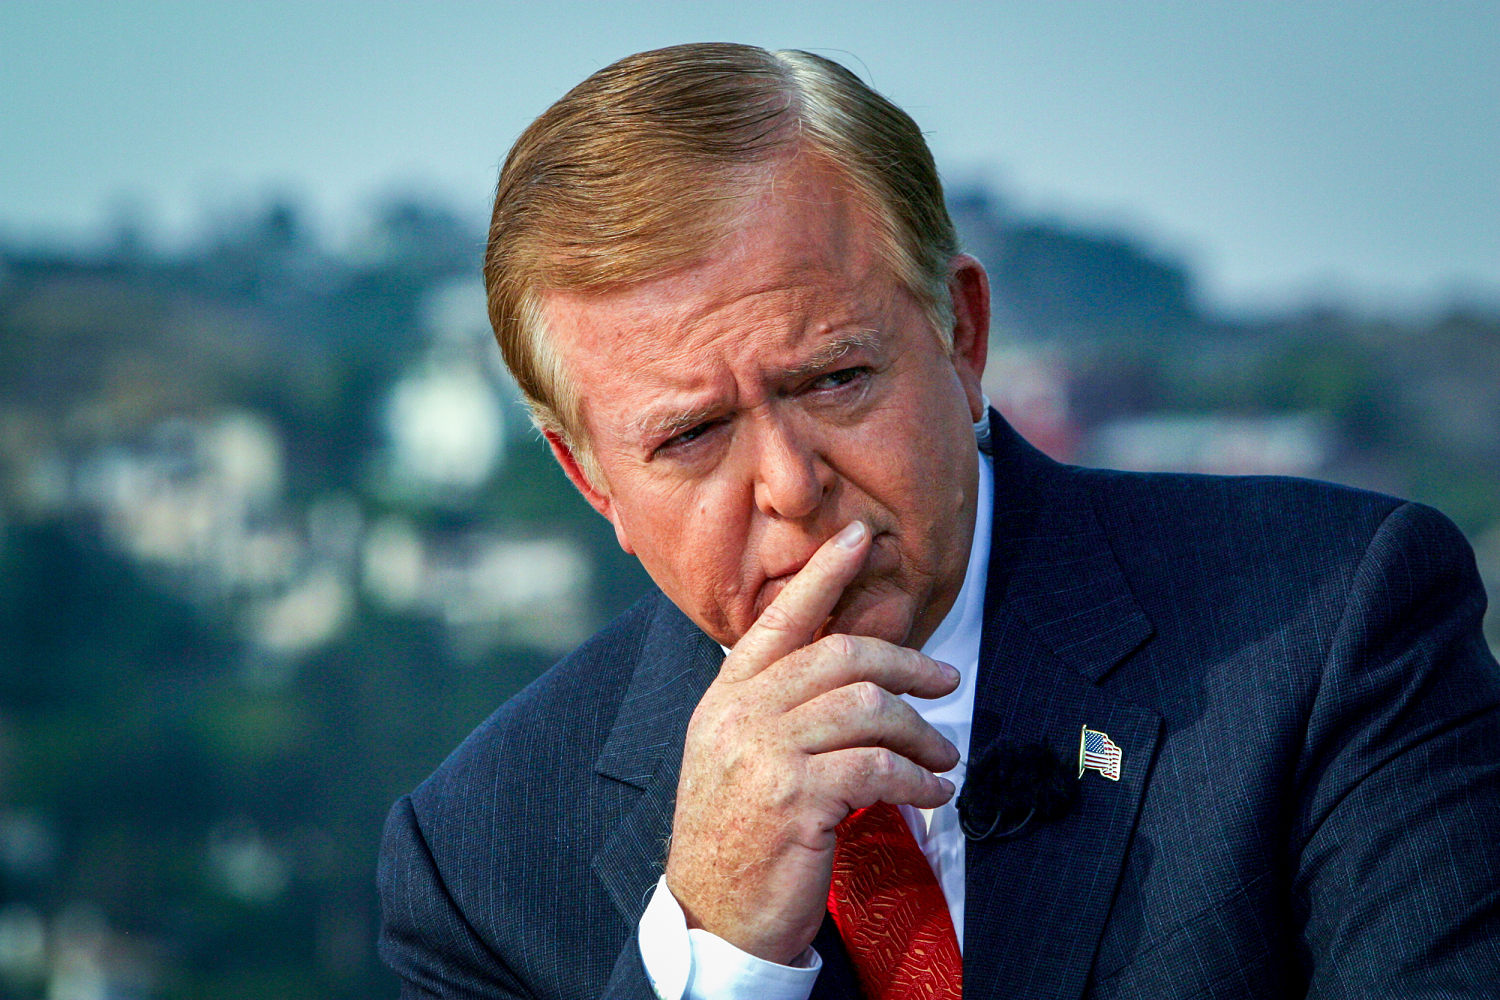 Lou Dobbs, cable news pioneer who vocally backed Donald Trump, dies at 78